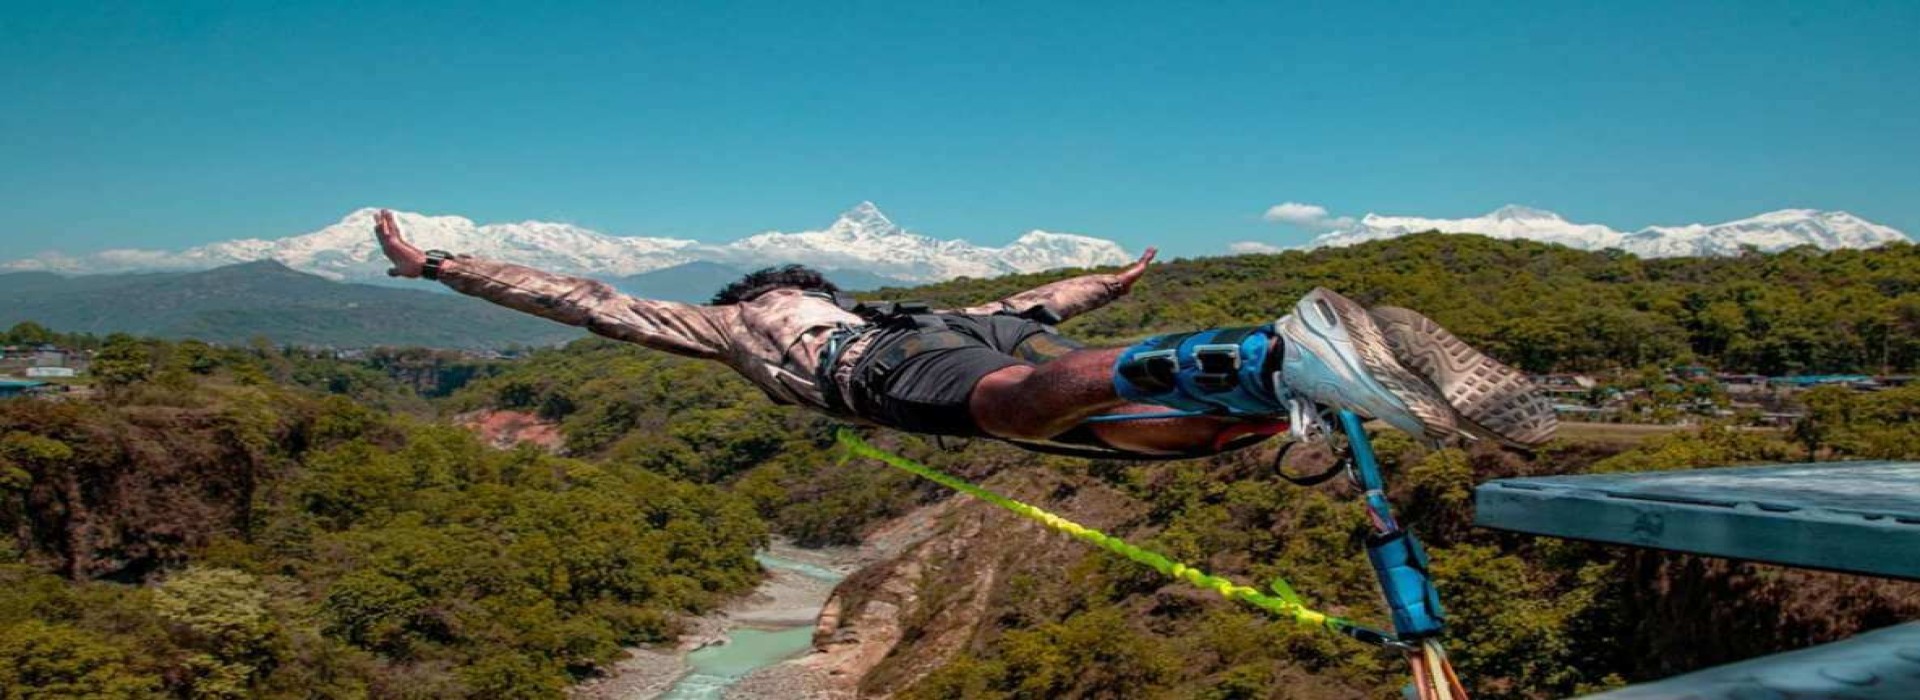 Bungee Jumping In Pokhara